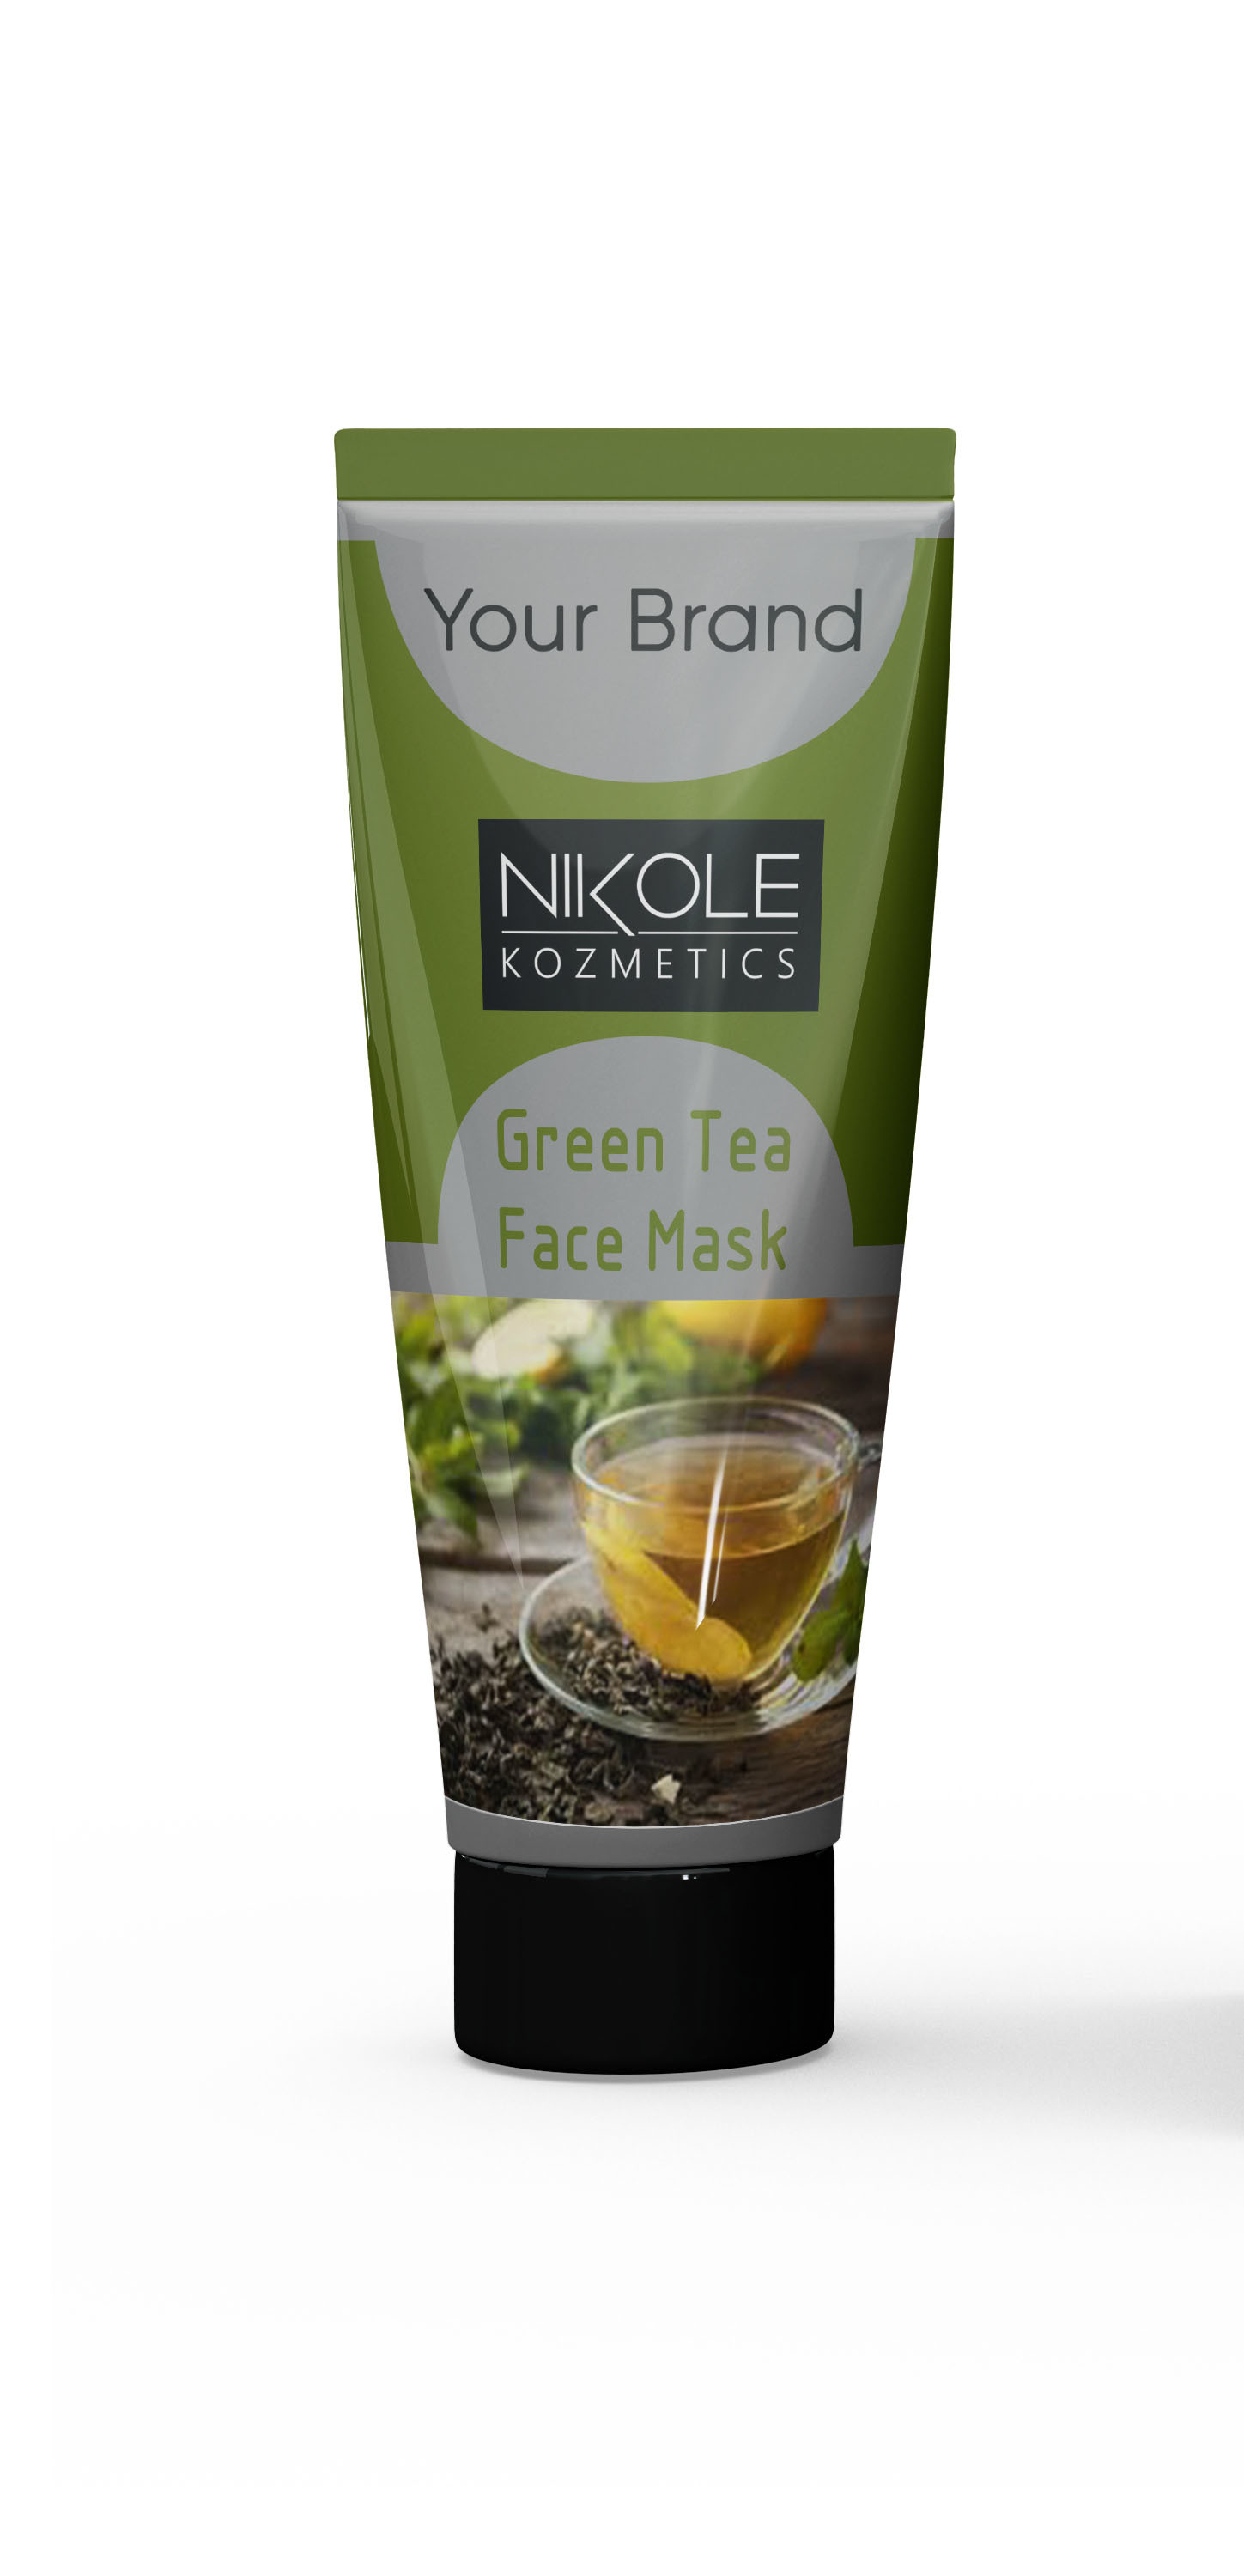 Green Tea Face Mask Third Party Manufacturing